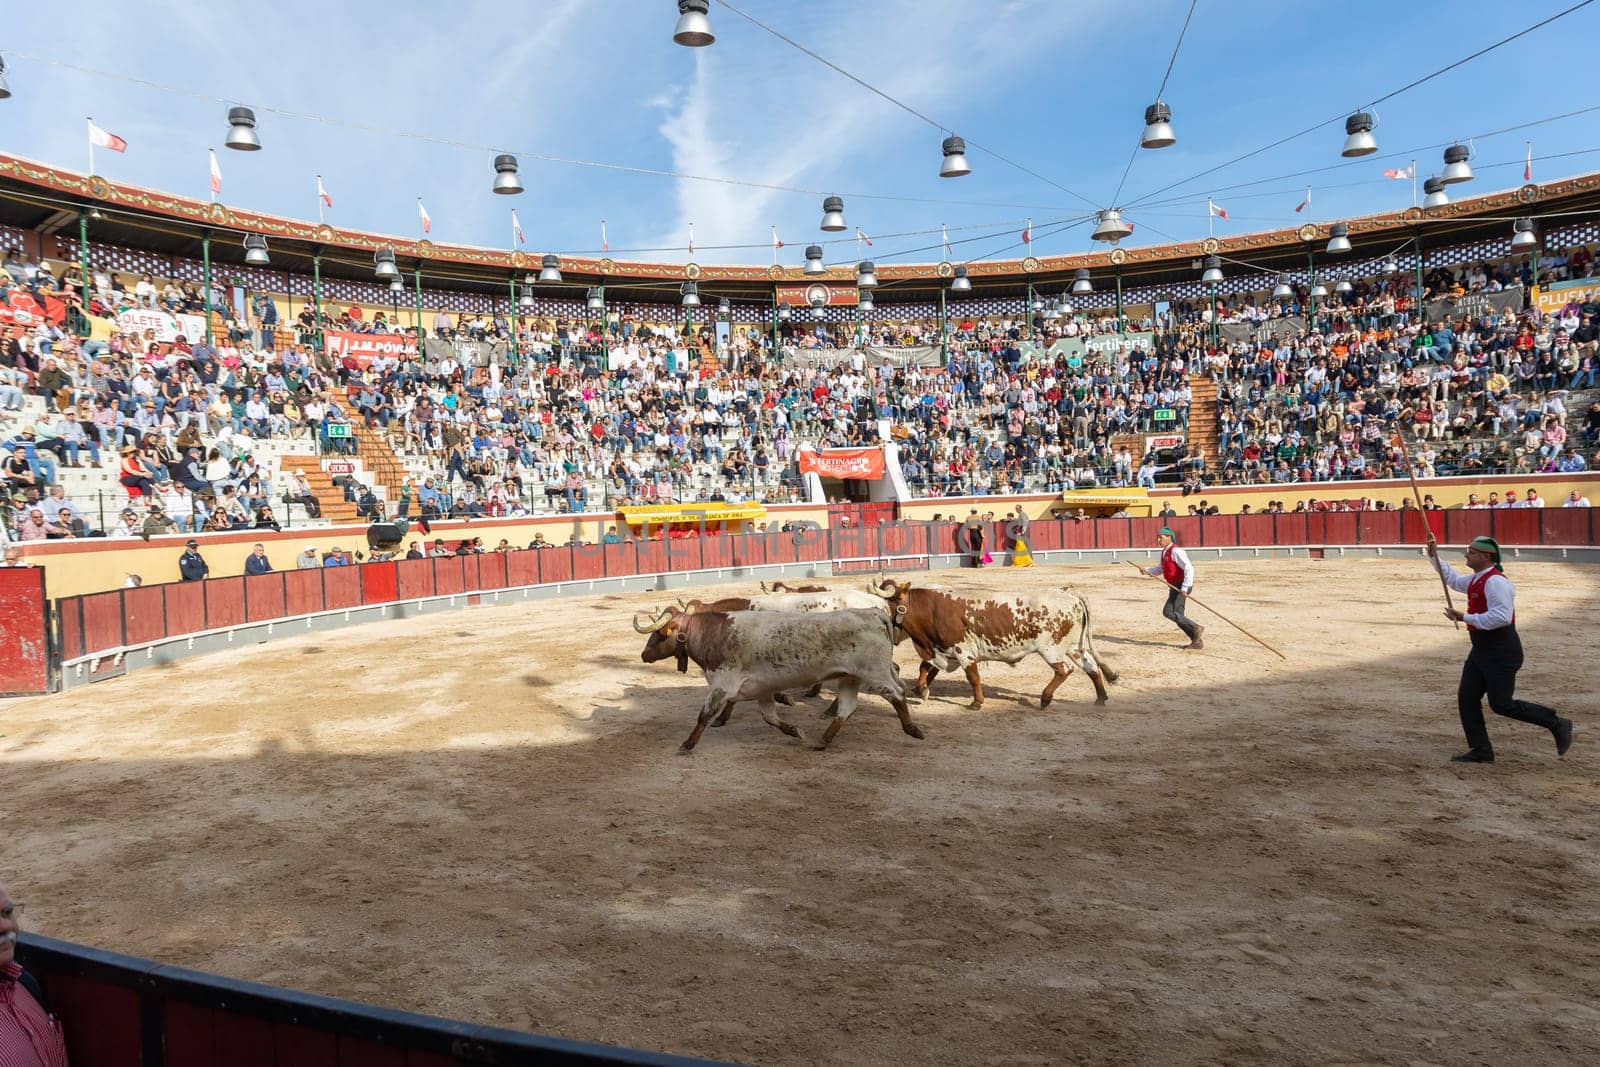 March 26, 2023 Lisbon, Portugal: Tourada - several bulls in the arena and forcado with spears following them by Studia72